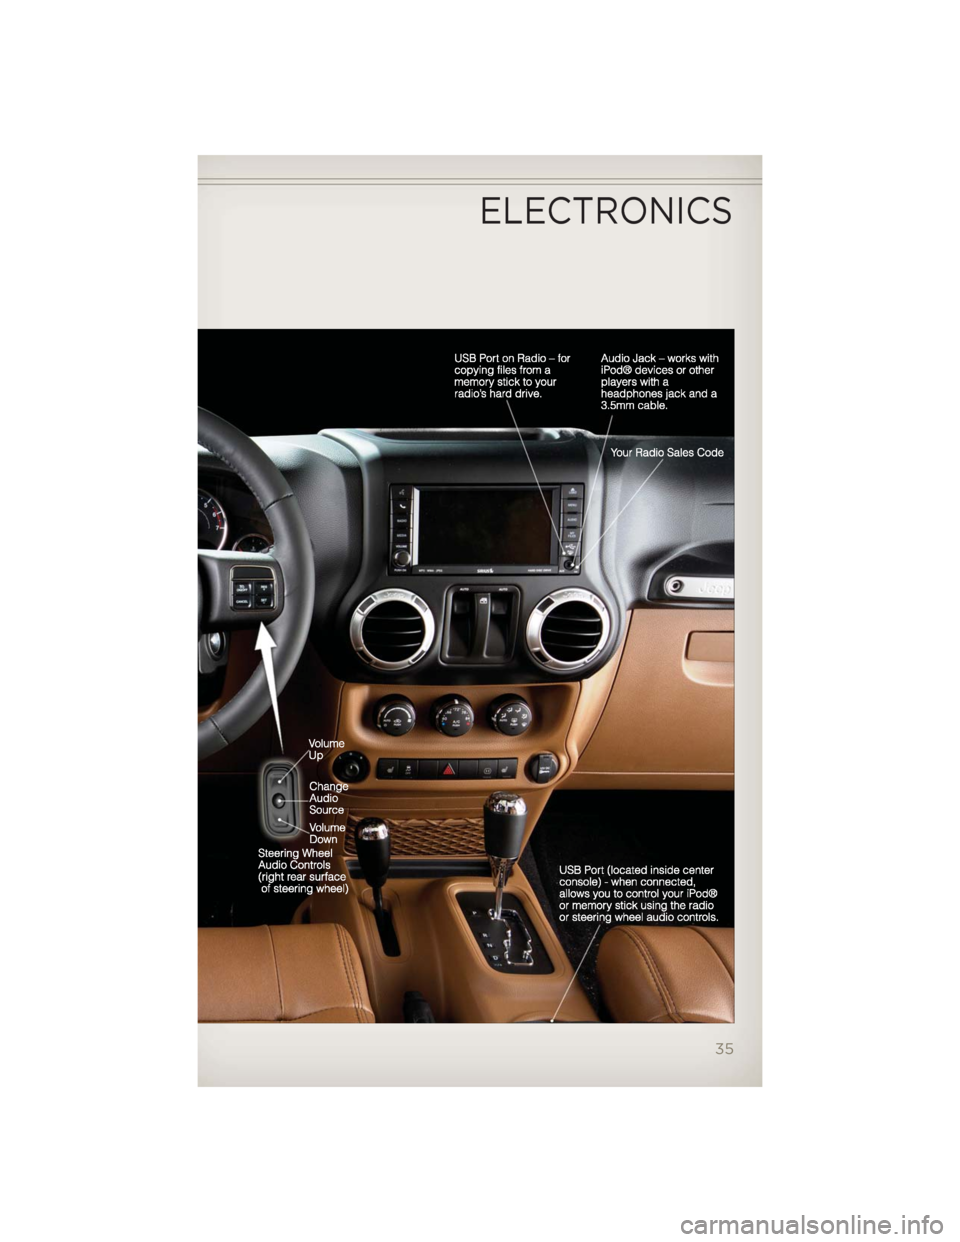 JEEP WRANGLER 2012 JK / 3.G Owners Guide ELECTRONICS
35 